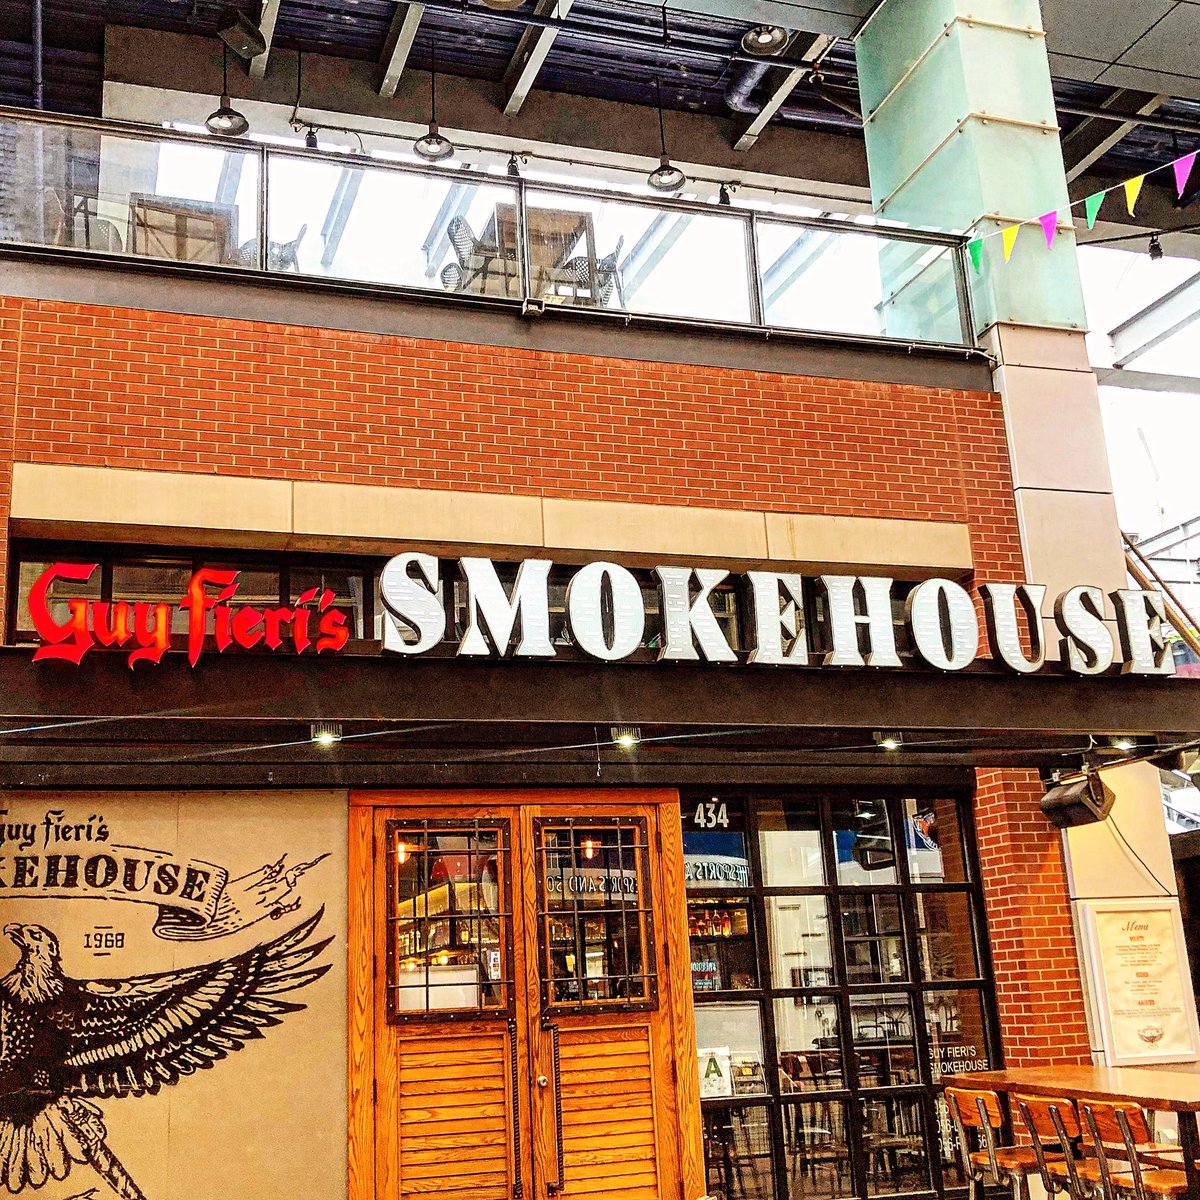 Wonderful Backyard Barbecue Stop… #travel #foodnetwork #guyfieri #smokehouse #kentucky #travelblogger #food #dinersdriveinsanddives #barbecue #foodie #fourthstreetlive #downtownlouisville #louisville